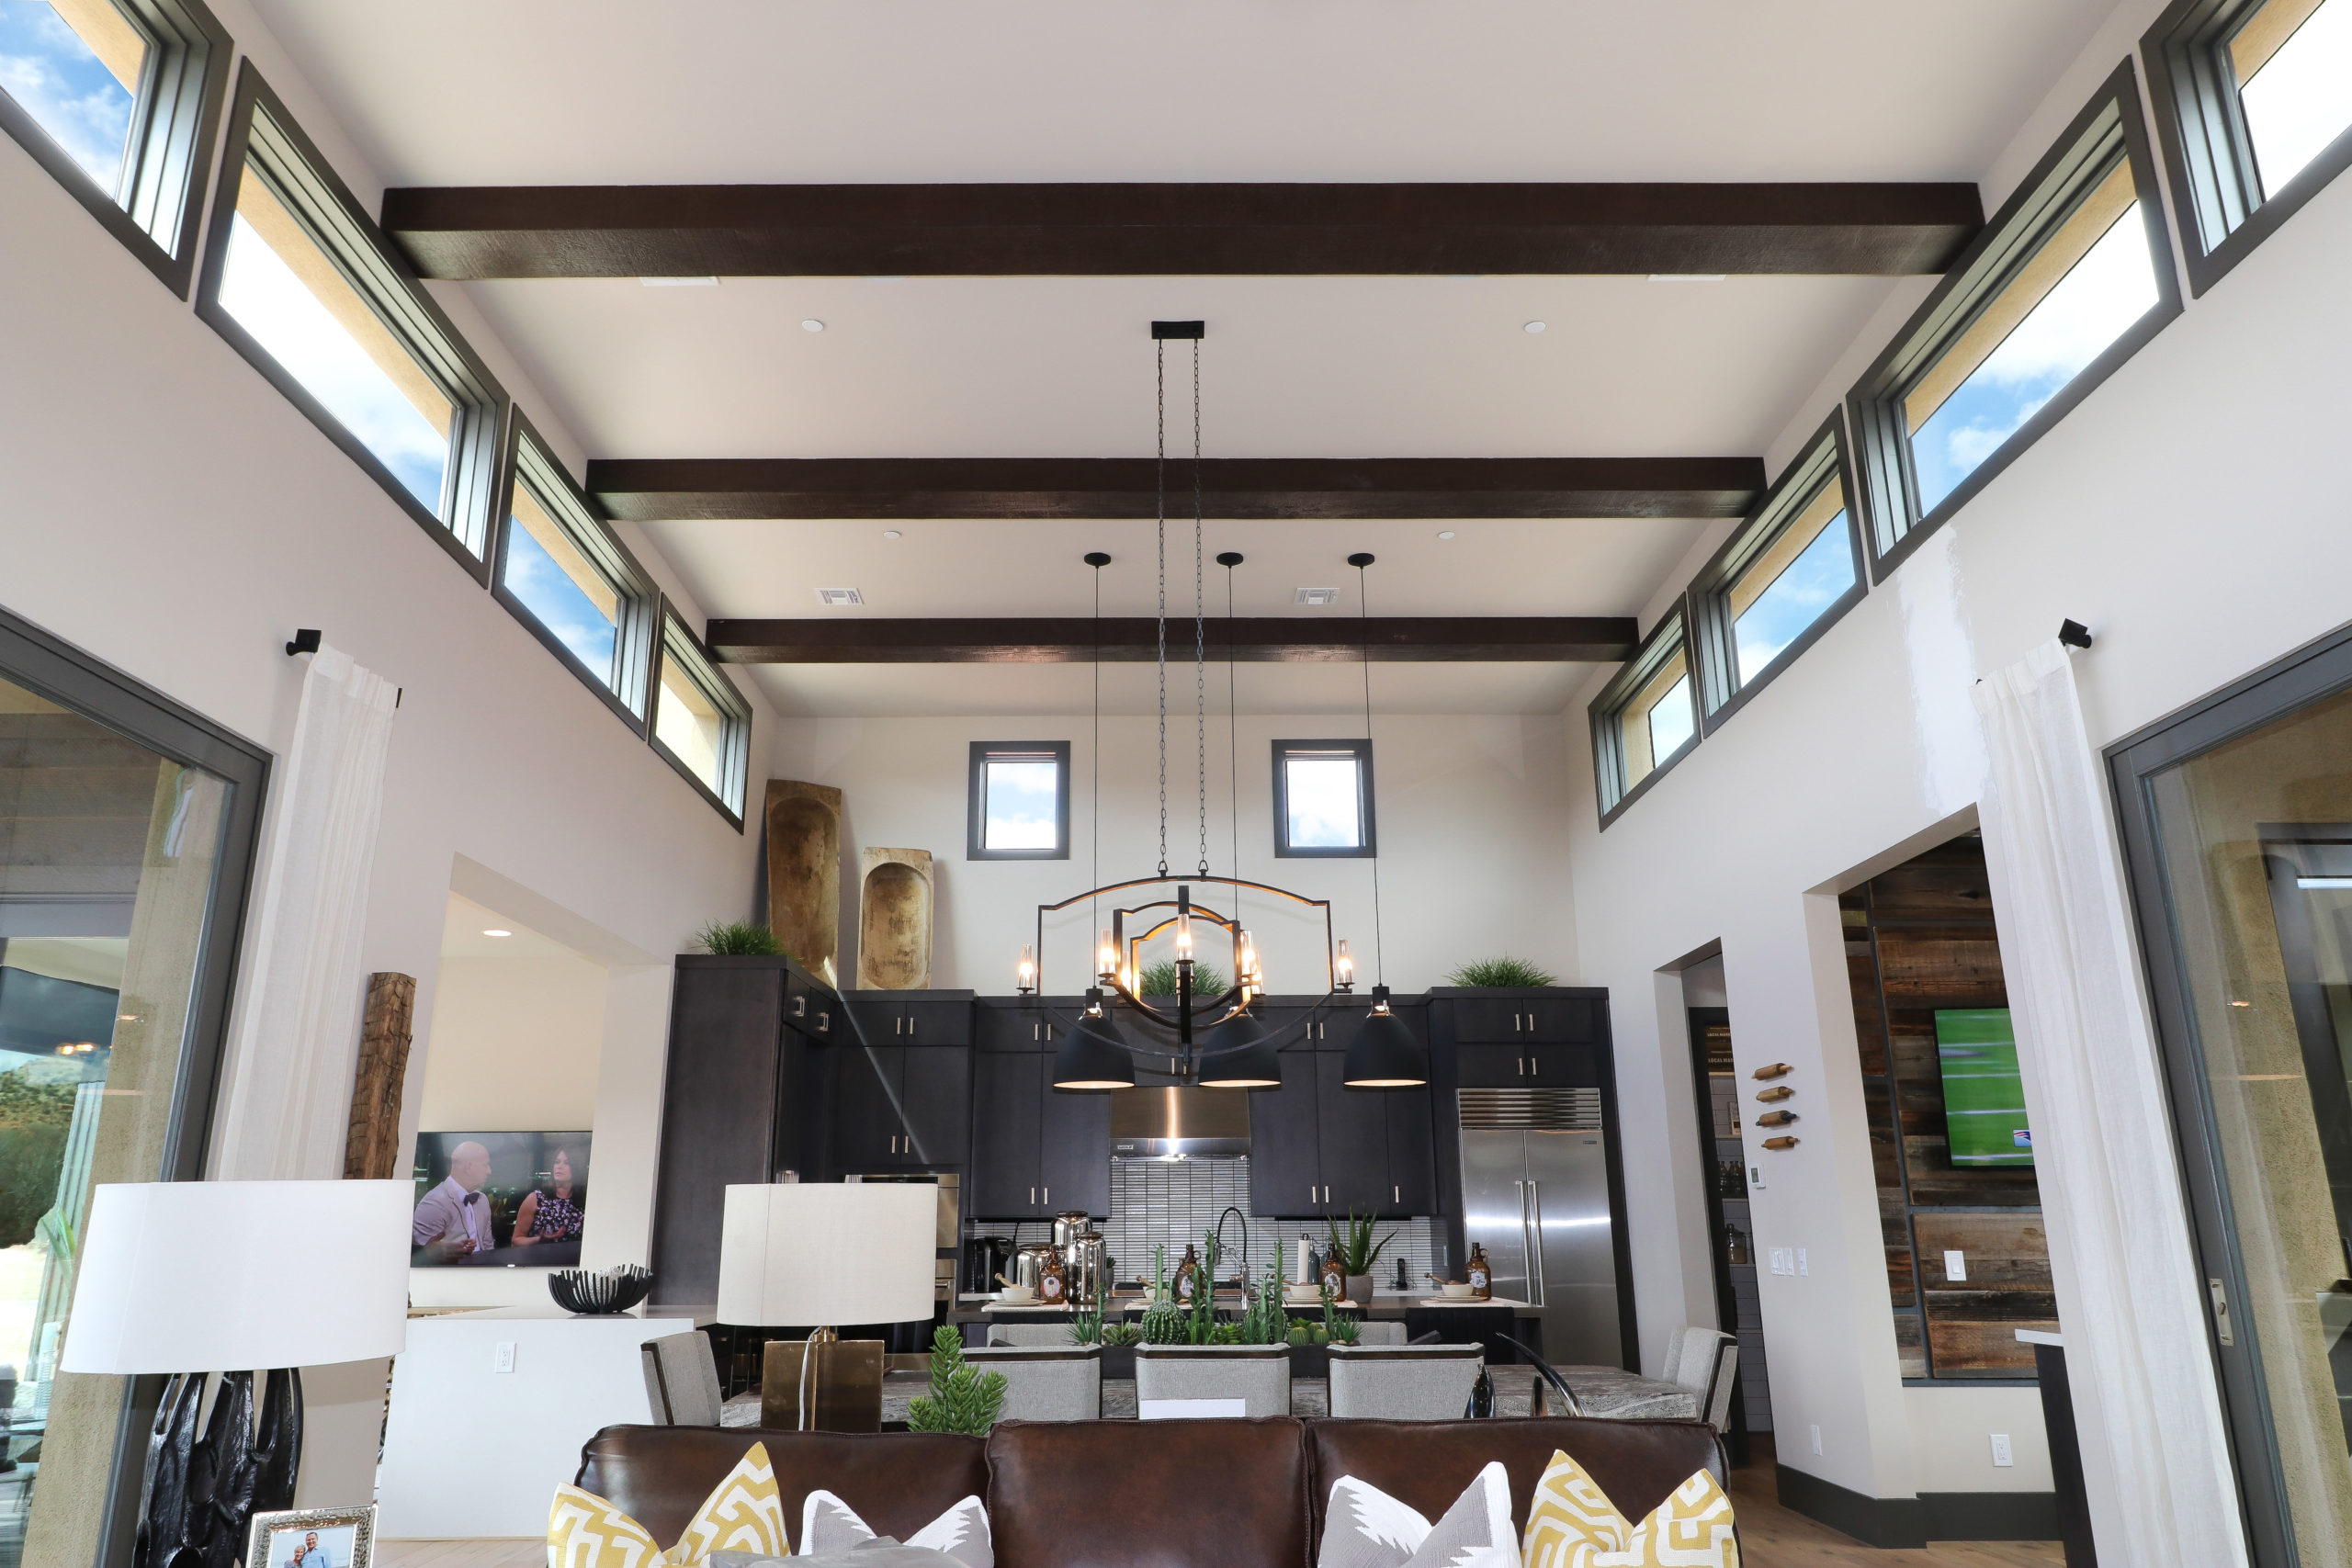 kitchen ceiling beams